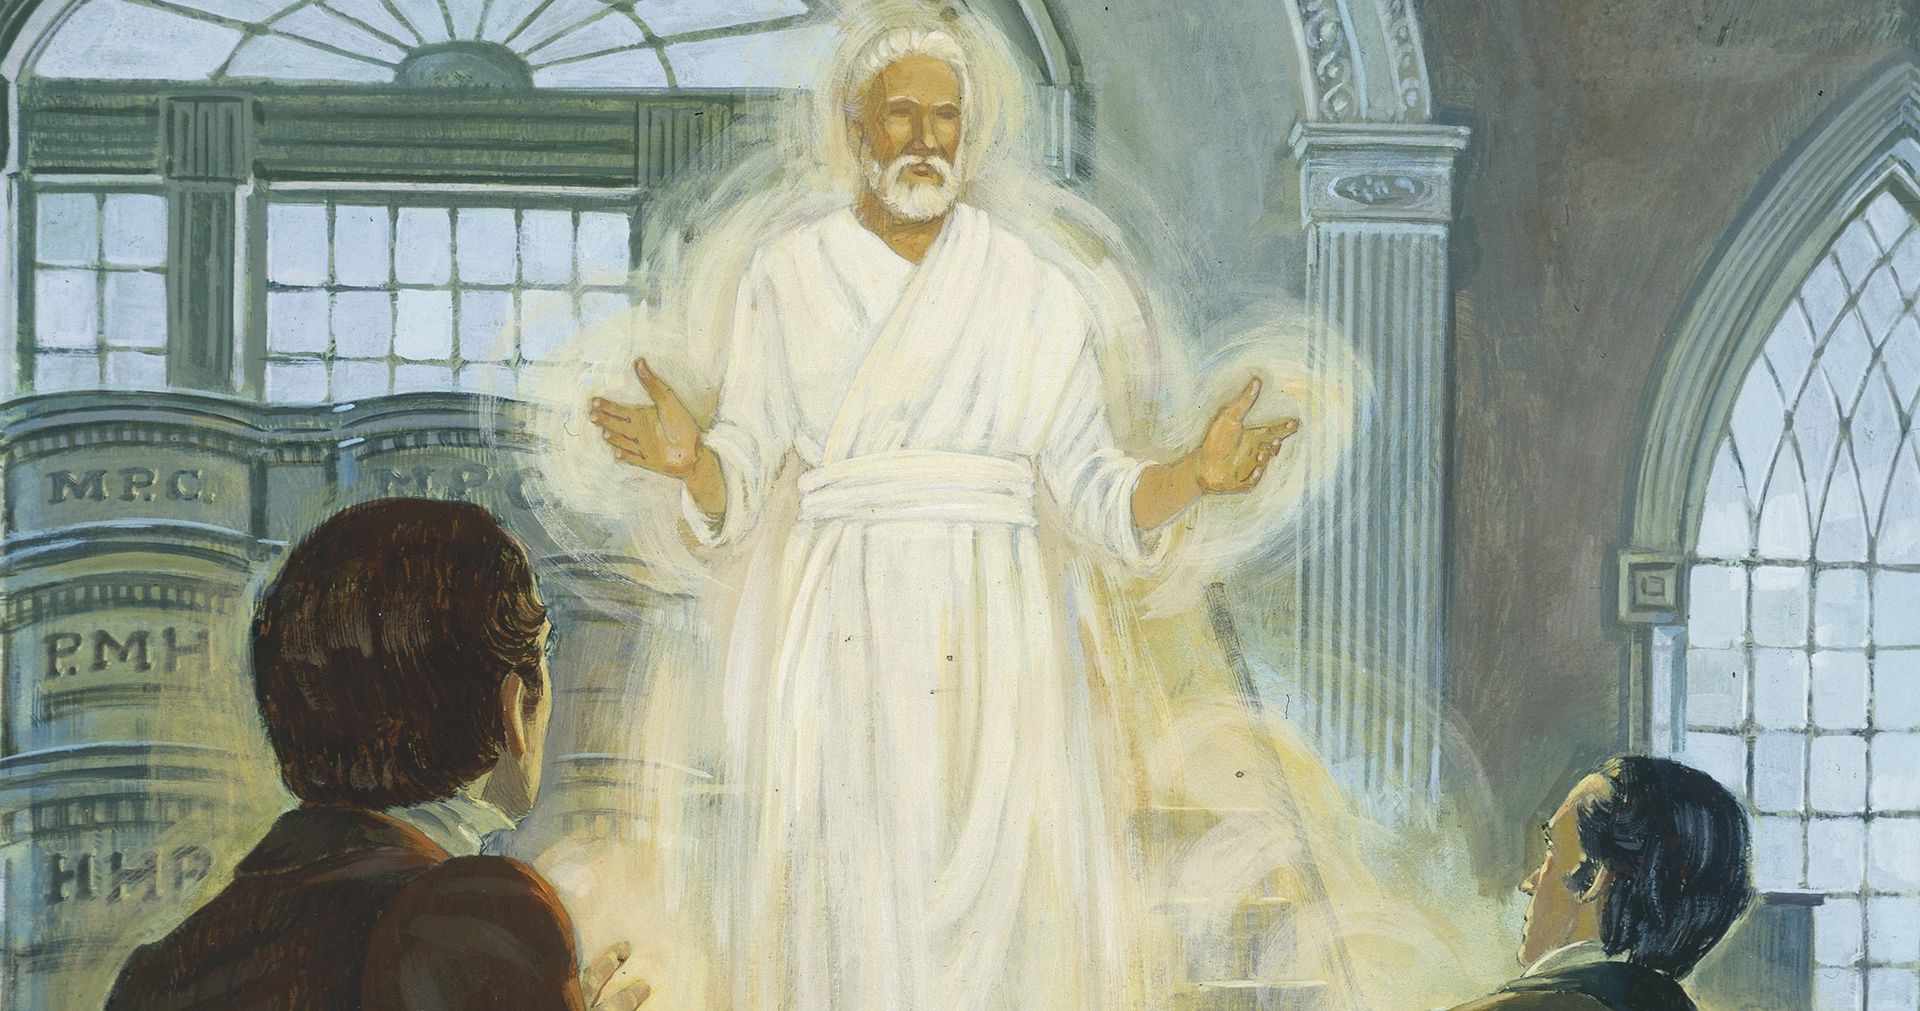 Painting of Elijah the prophet appearing to Joseph Smith and Oliver Cowdery at the Kirtland Temple.